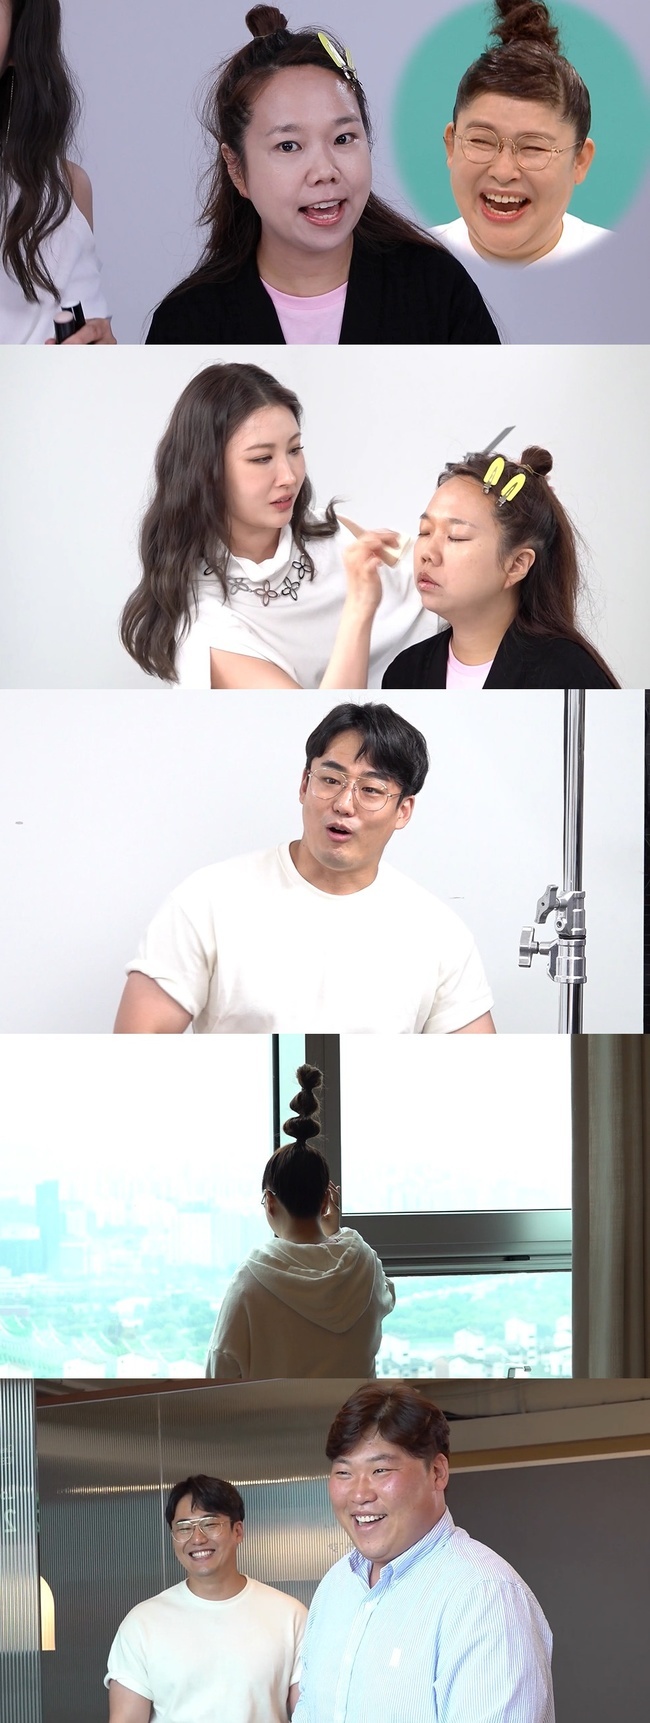 Point of Omniscient Interfere Hong Hyon-hee transforms into Lee Young-ja by surpriseMBC Point of Omniscient Interfere (planned by Park Jung-gyu / directed by Noh Si-yong, Chae Hyun-seok / hereinafter Point of Omniscient Interfere) 163 times broadcast on July 24 depicts the amazing day of Hong Hyon-hee, which perfectly transformed into Lee Young-ja.On this day, Hong Hyon-hee prepares a surprise event for the auctioneer, and decided to make a tour of Lee Young-ja and restaurant, a wish of the best.The place where Hong Hyon-hee visited was the studio of beauty creator RISABAE.Hong Hyon-hee transforms perfectly into Lee Young-ja, thanks to RISABAEs godly transformation.Hong Hyon-hee has not been quiet all along with RISABAEs makeup technology, which is comparable to molding.Manager also said that he was elastic when he saw Hong Hyon-hee, who transformed into Lee Young-ja.In particular, Lee Young-jas trademark hairstyle is said to have been perfectly reproduced, adding to expectations.